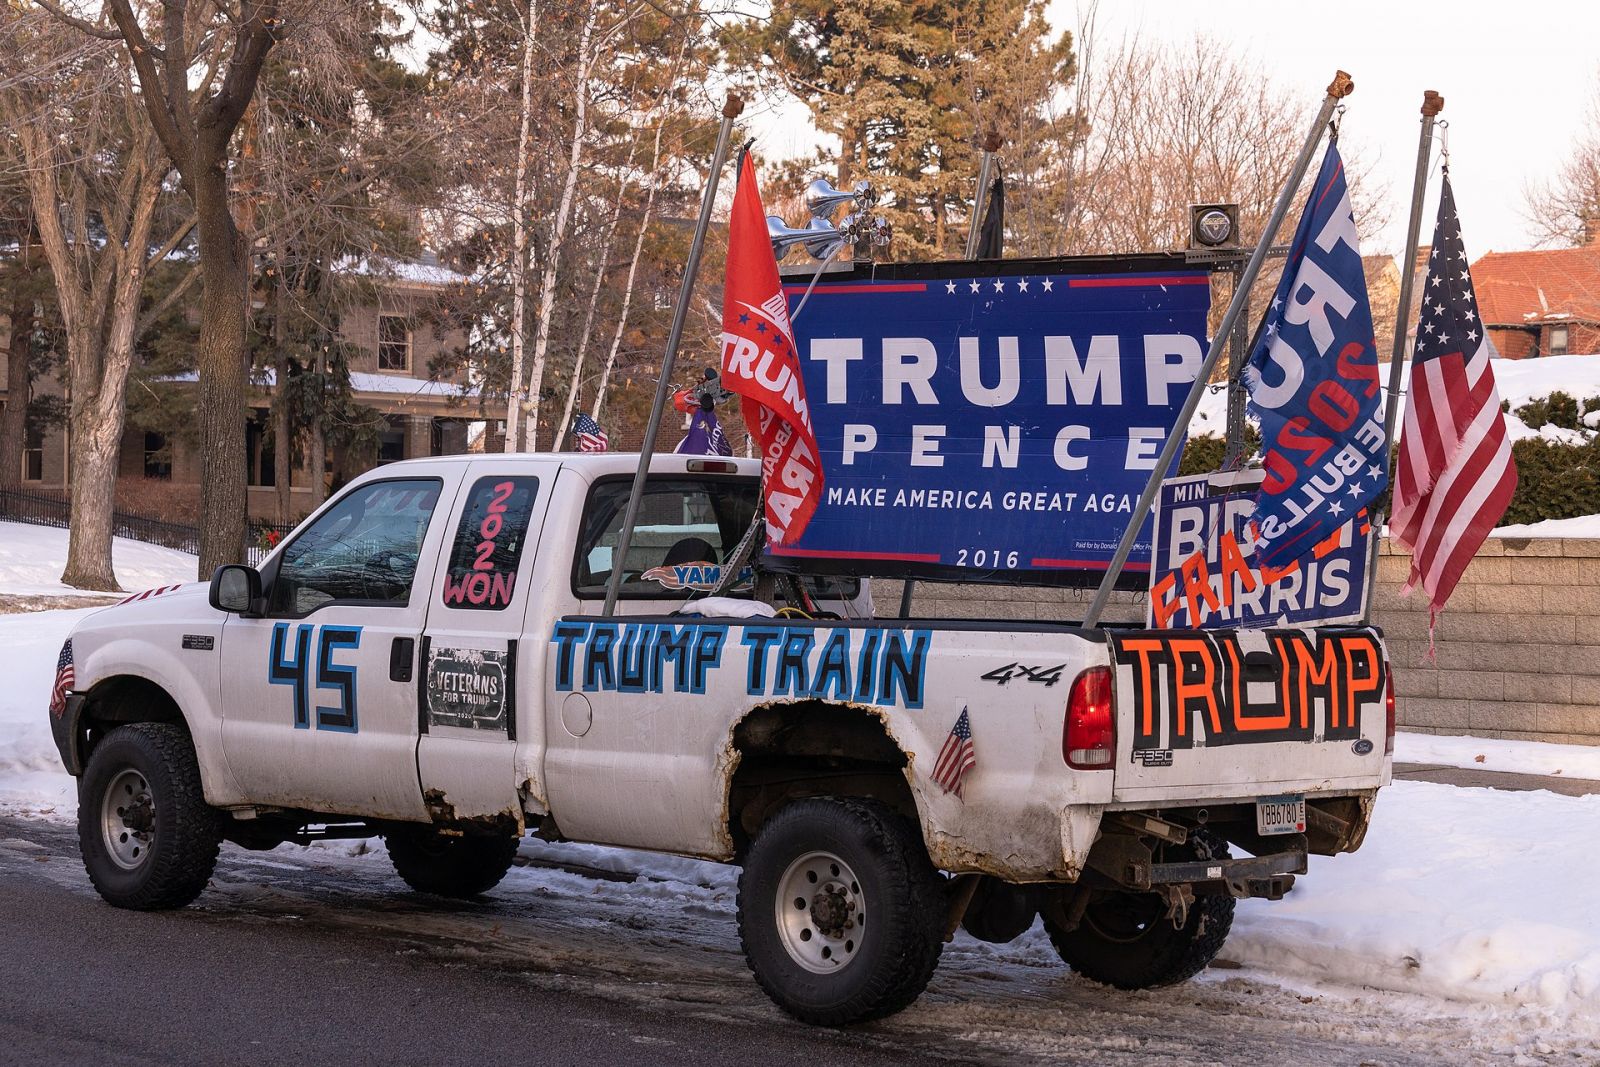 Pick-up truck decorated with Trump banners